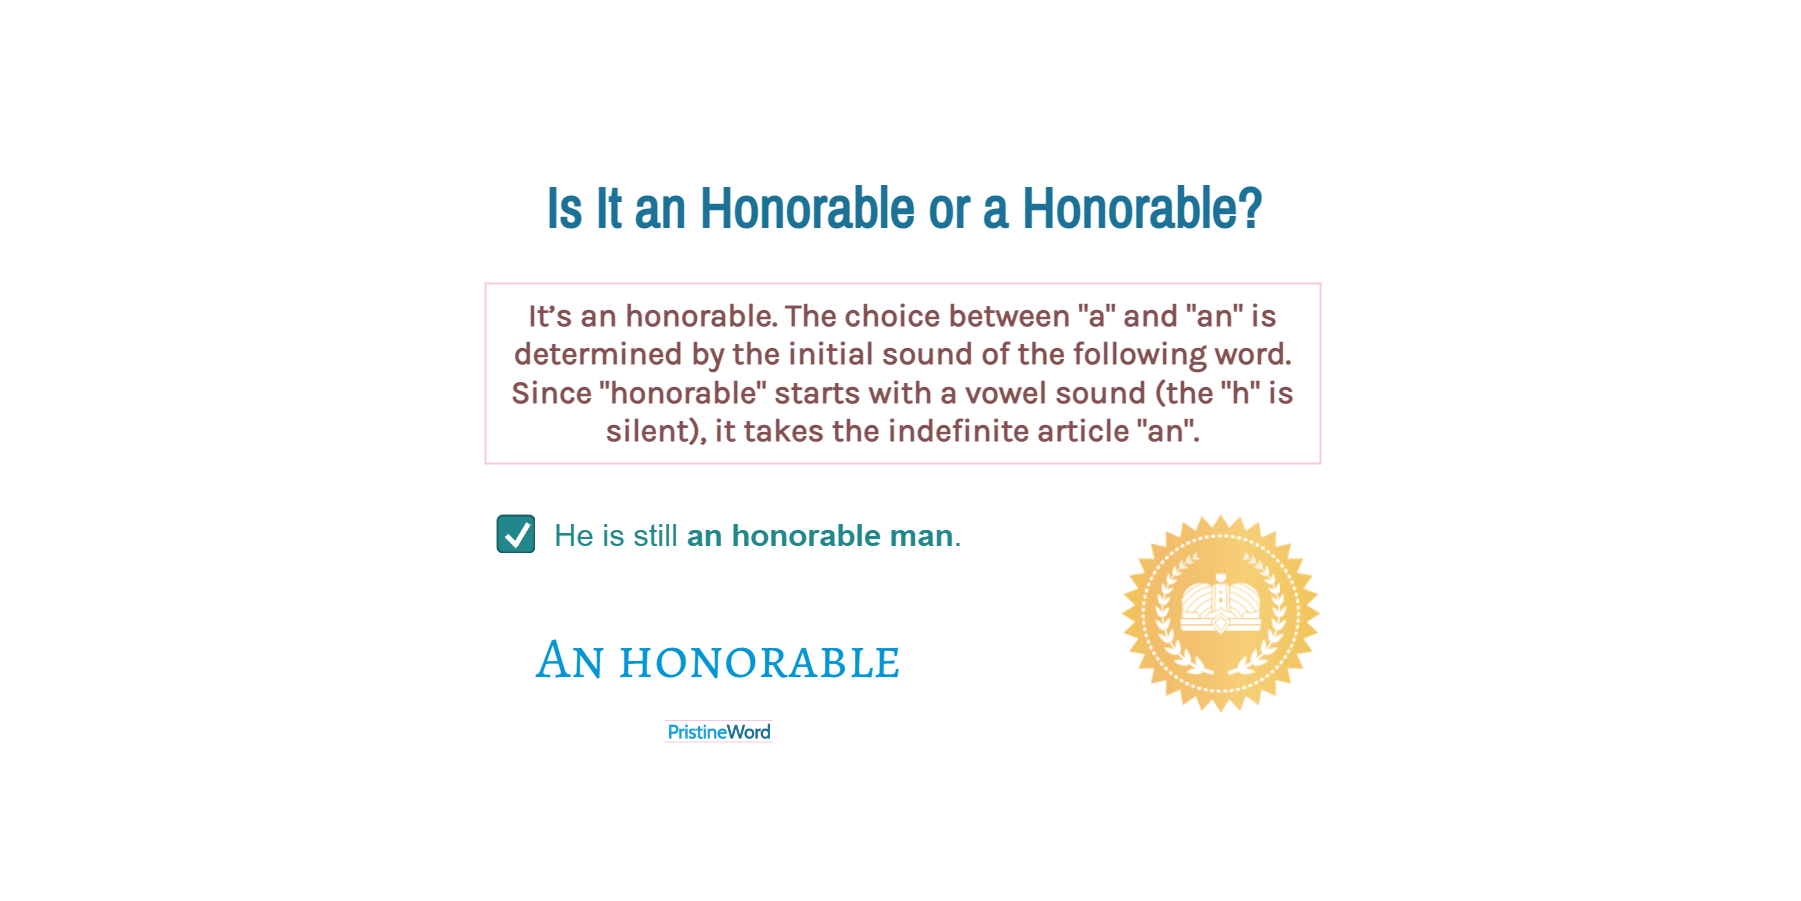 Is It an Honorable or a Honorable?